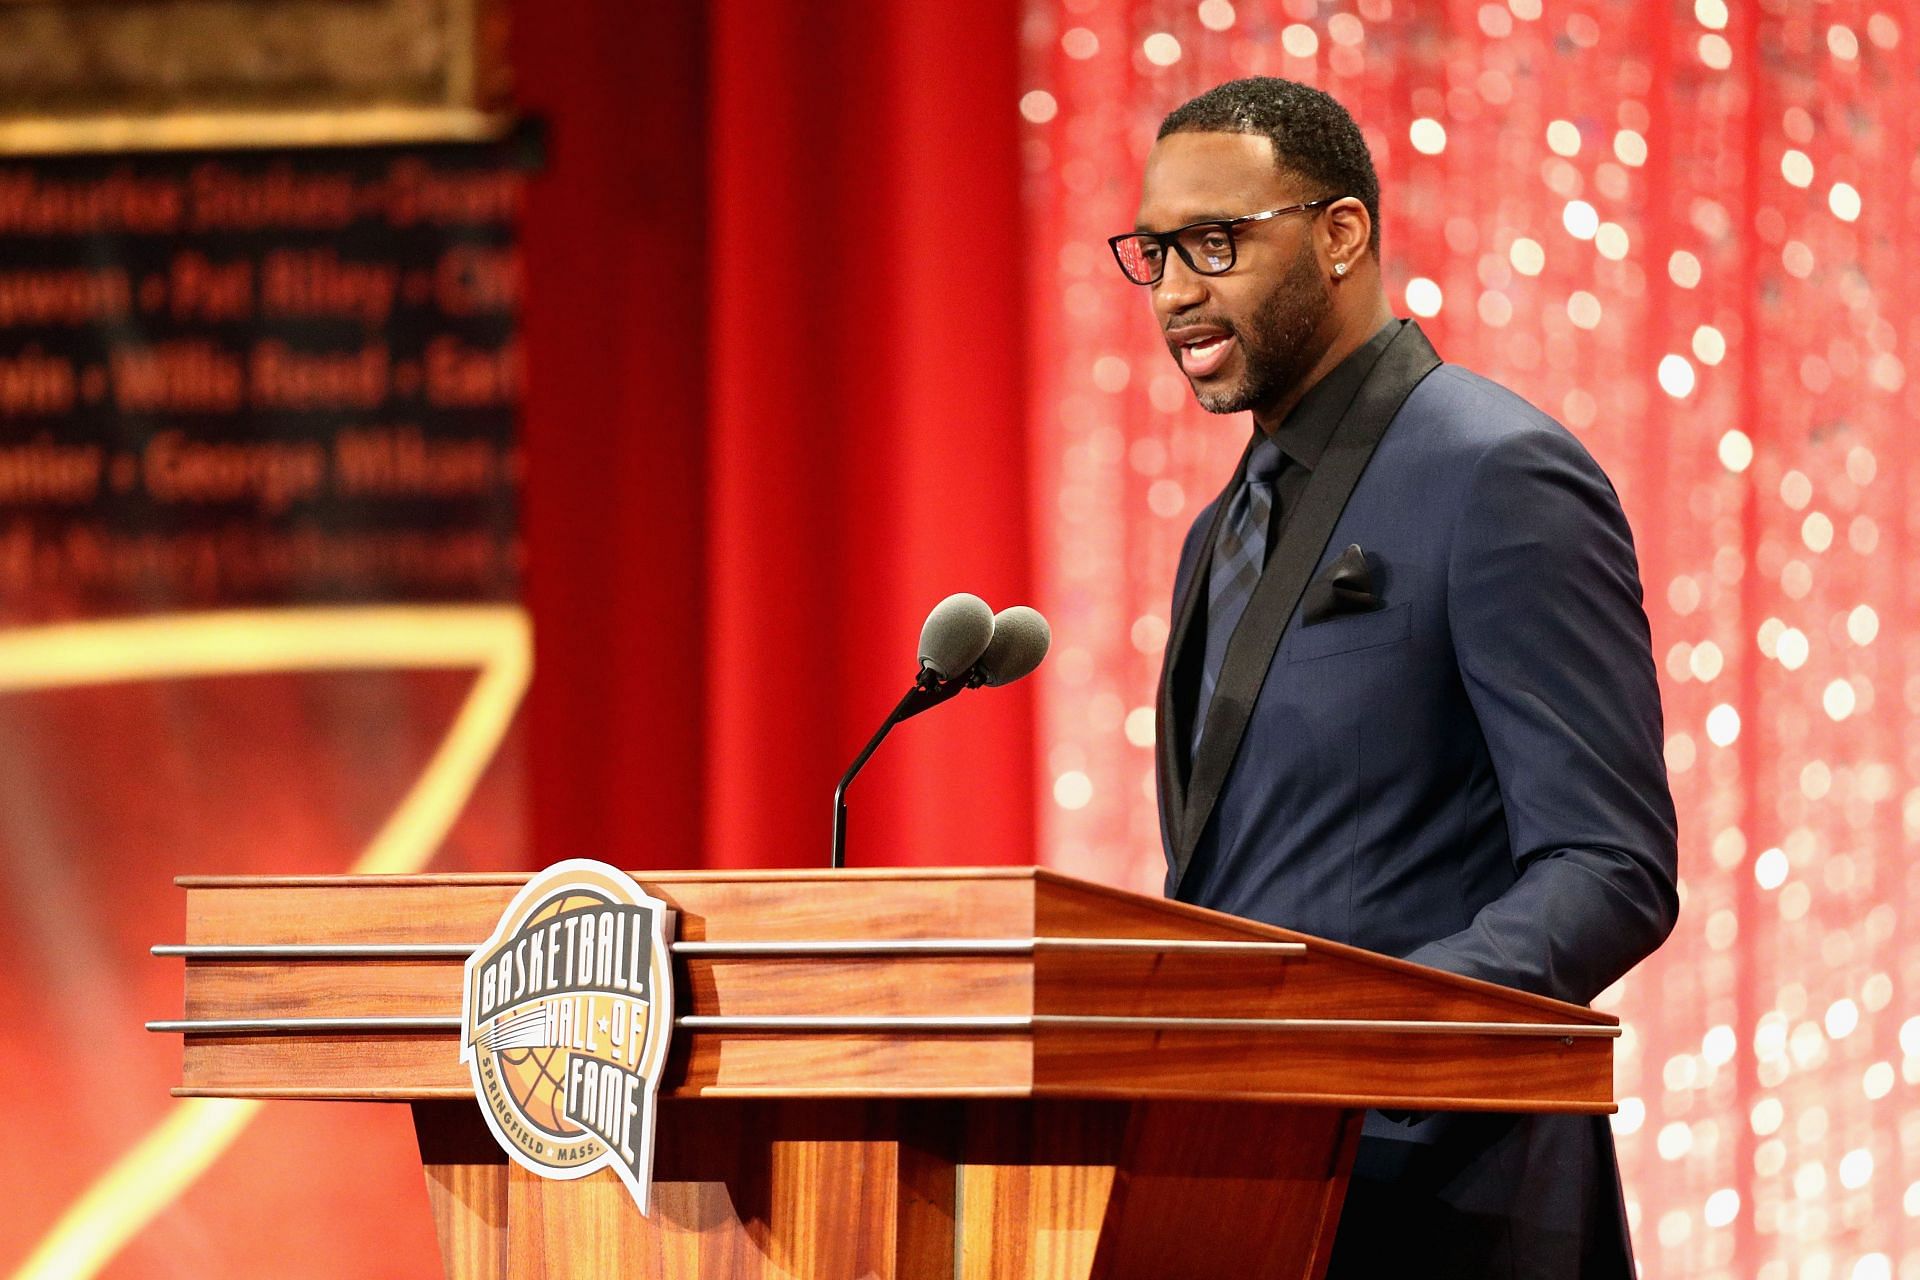 Basketball Hall of Famer Tracy McGrady could have gone to one of the elite college basketball programs